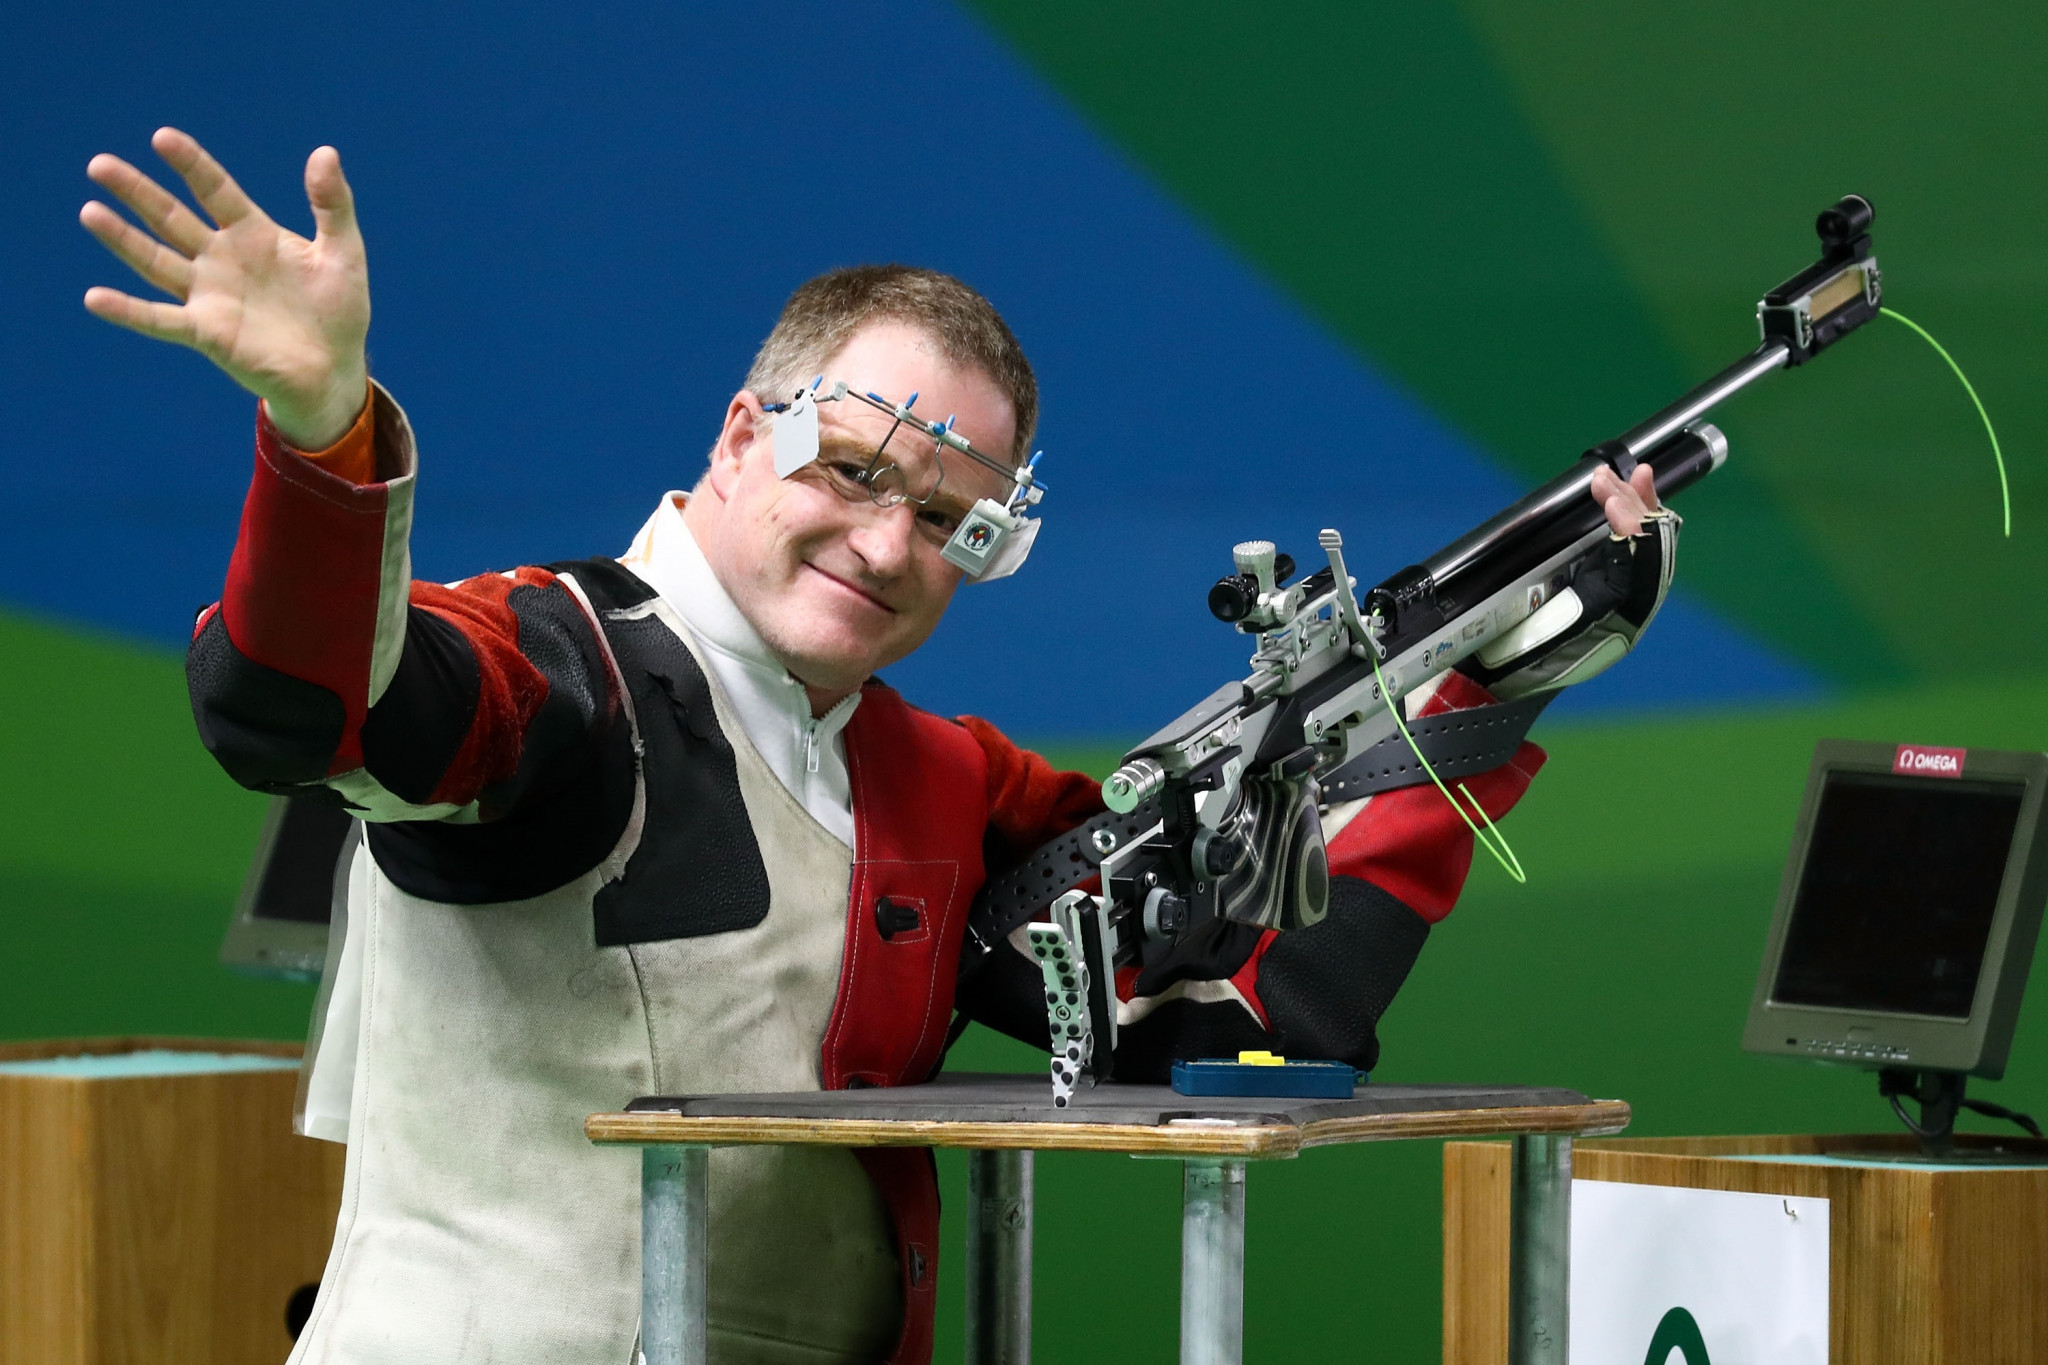 New Zealand team named for 2019 World Shooting Para Sport Championships